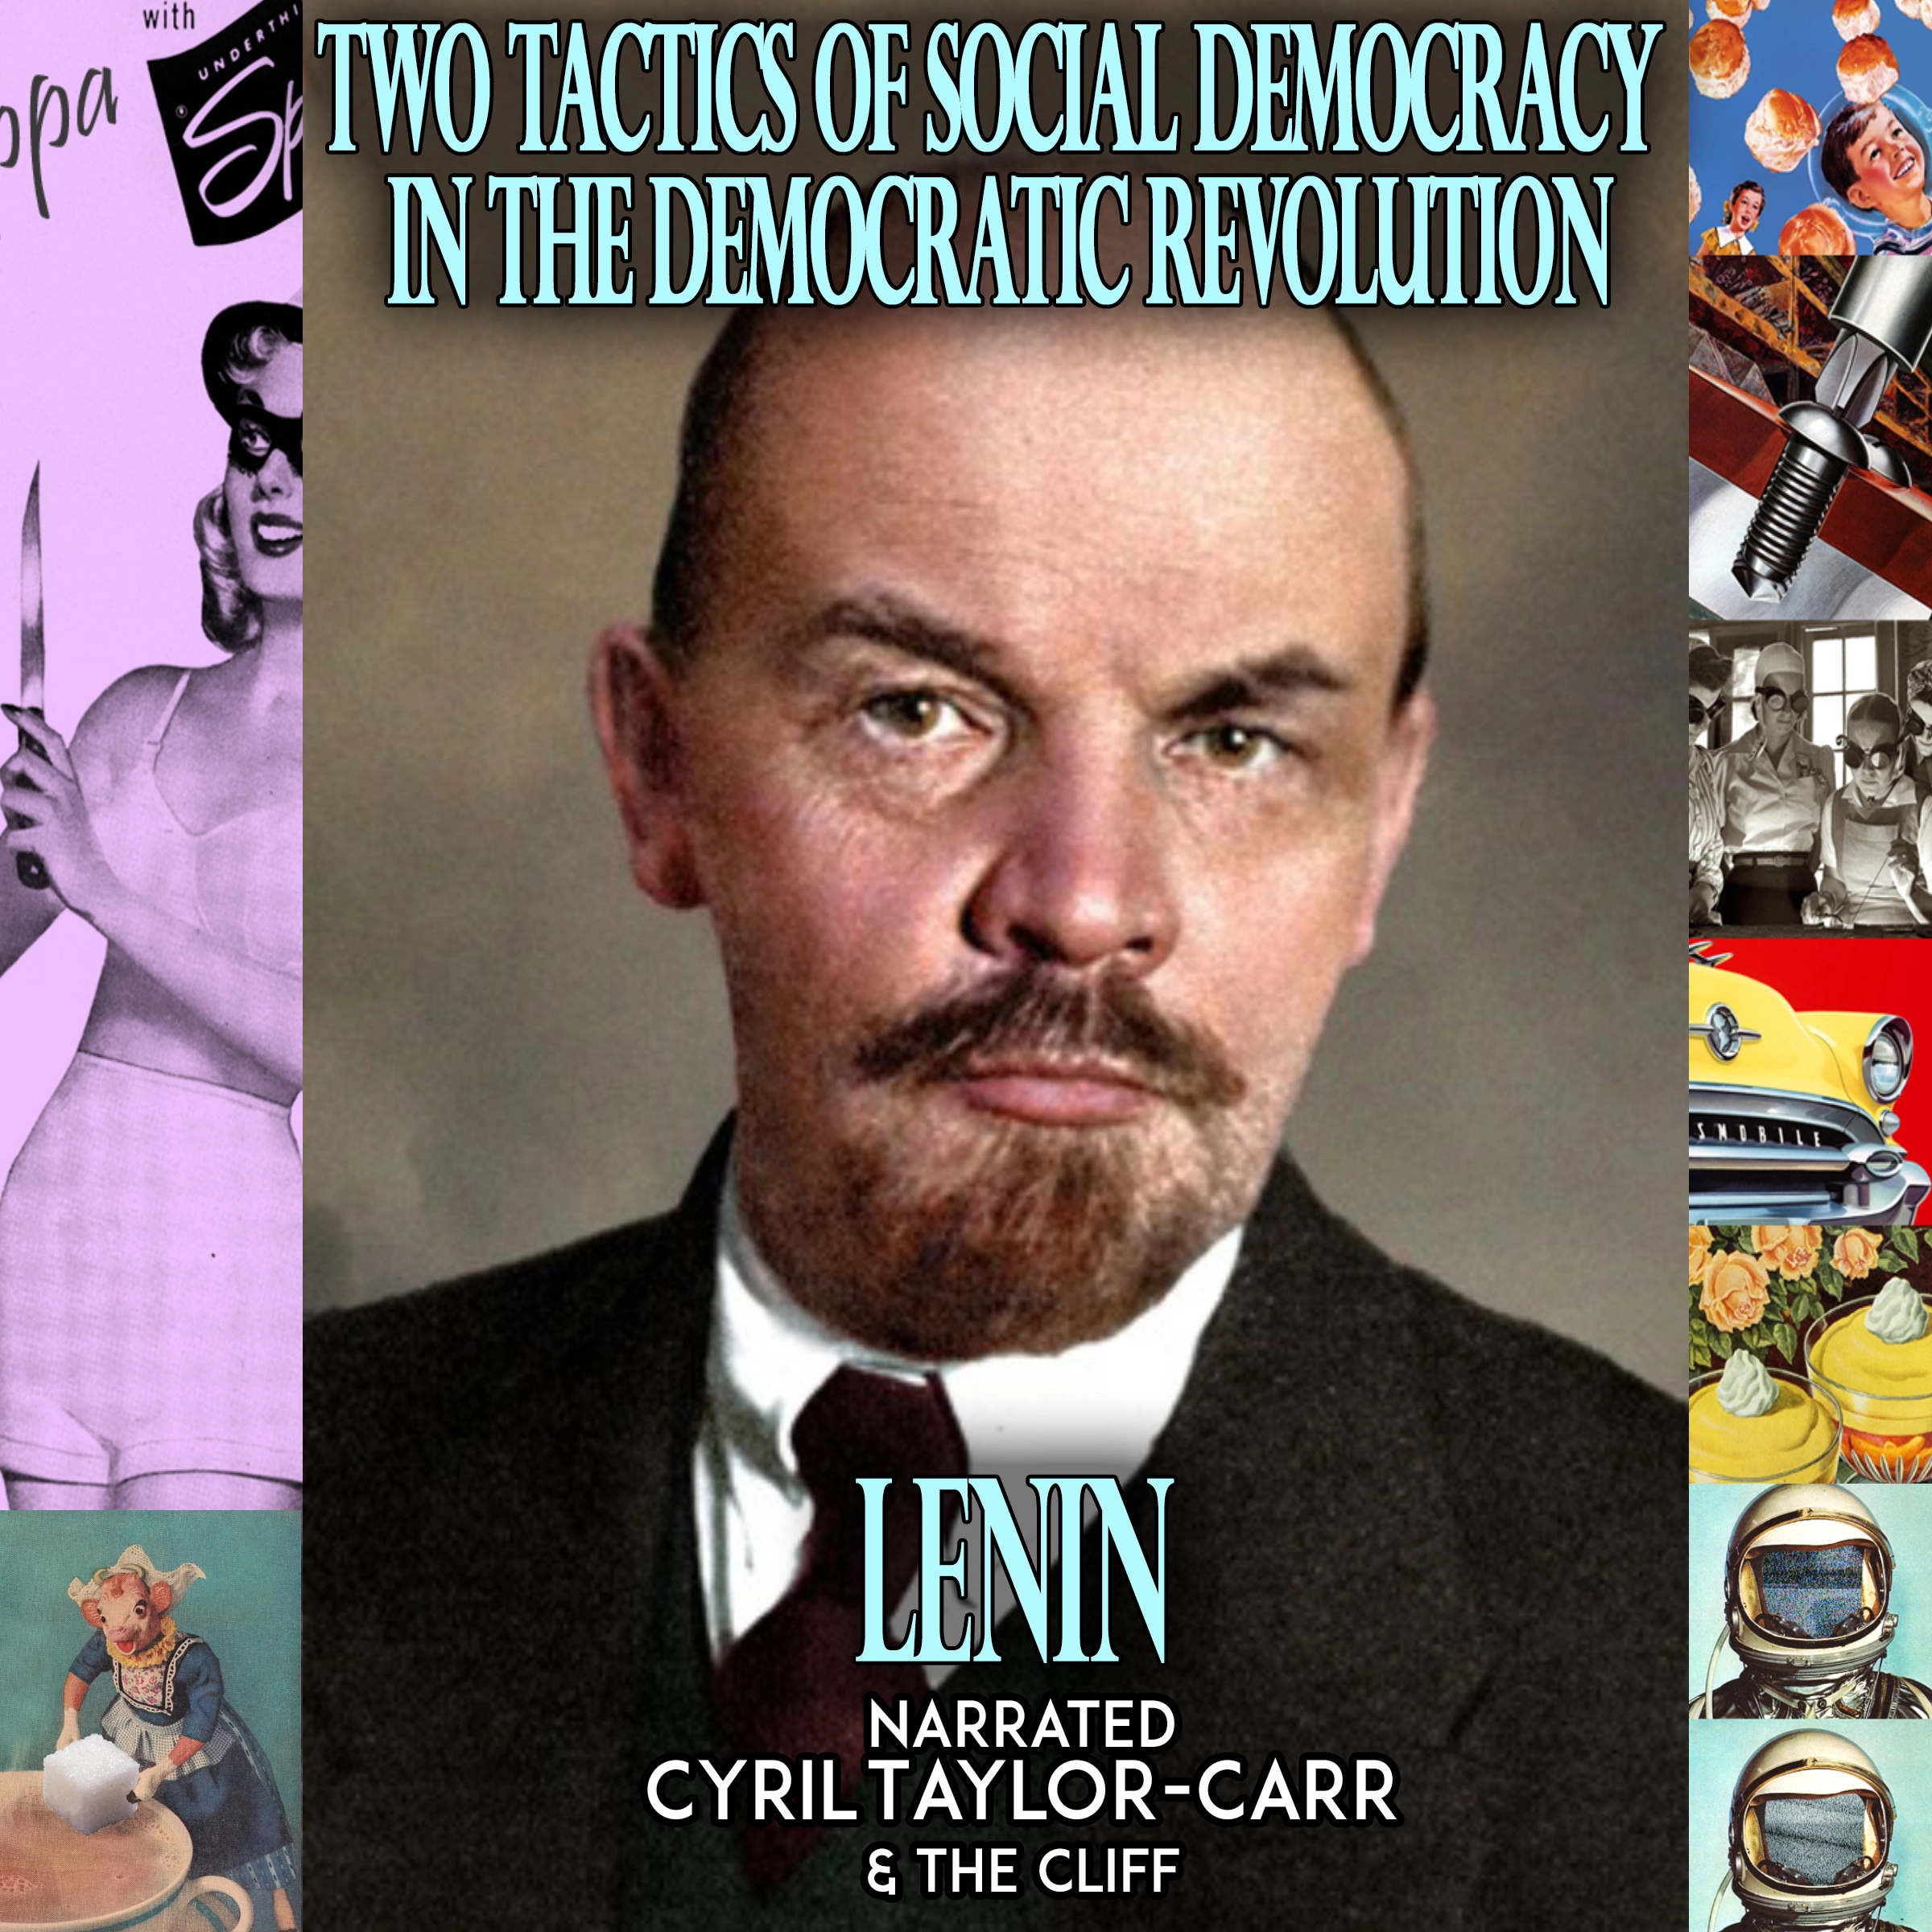 Two Tactics of Social-Democracy In The Democratic Revolution Audiobook by Lenin